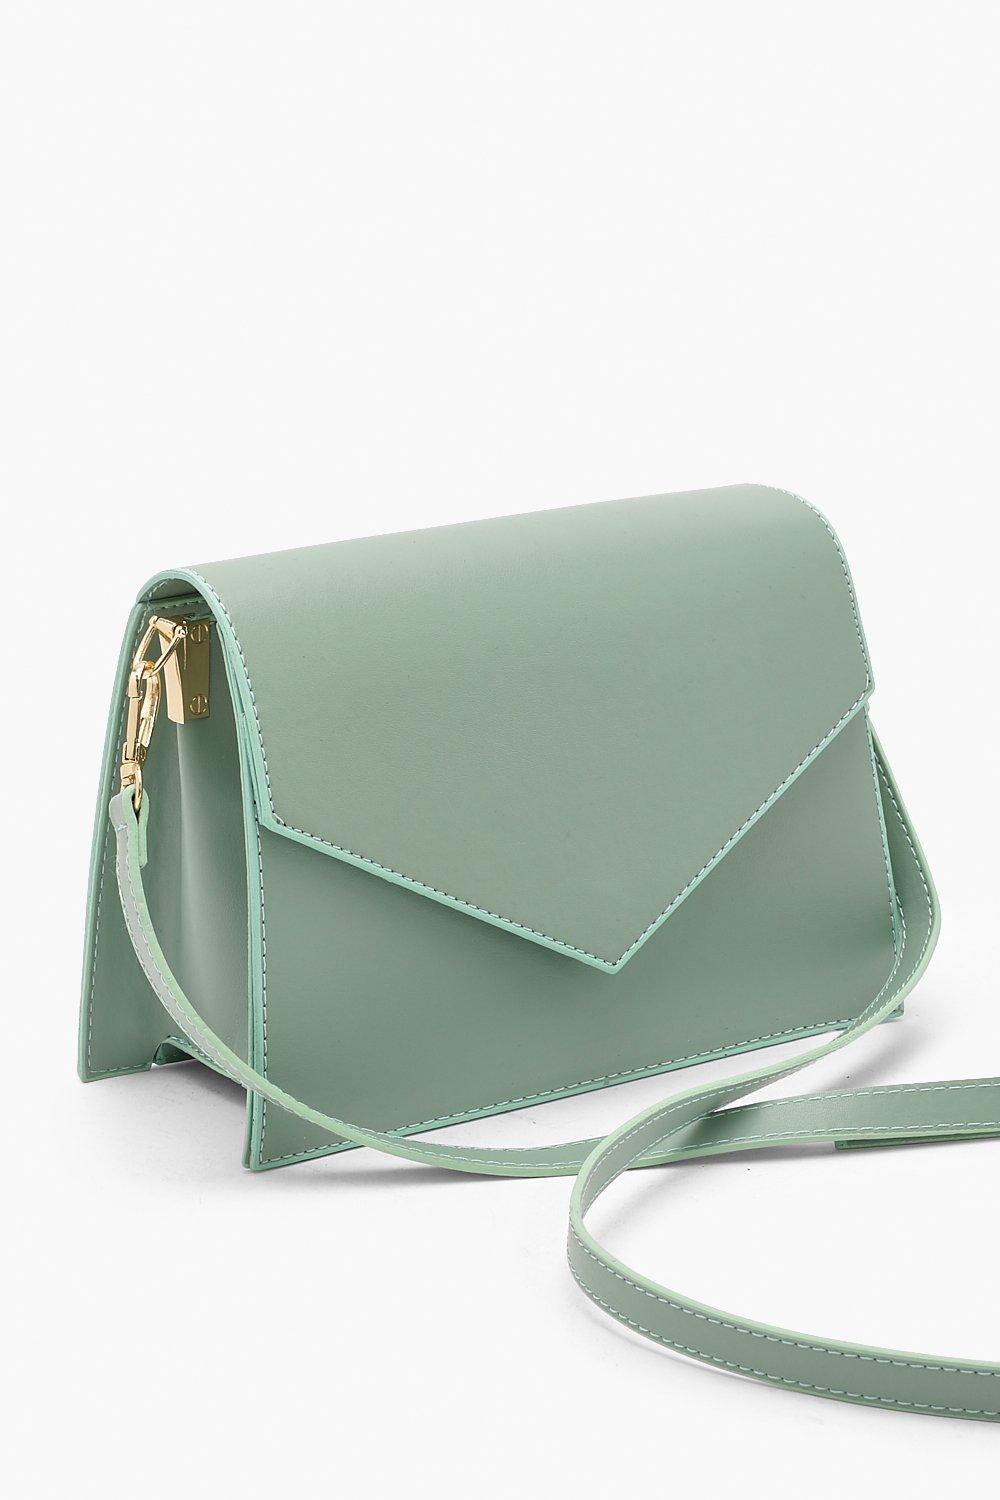 Sage Green Purse | Mint green aesthetic, Bags, Purses